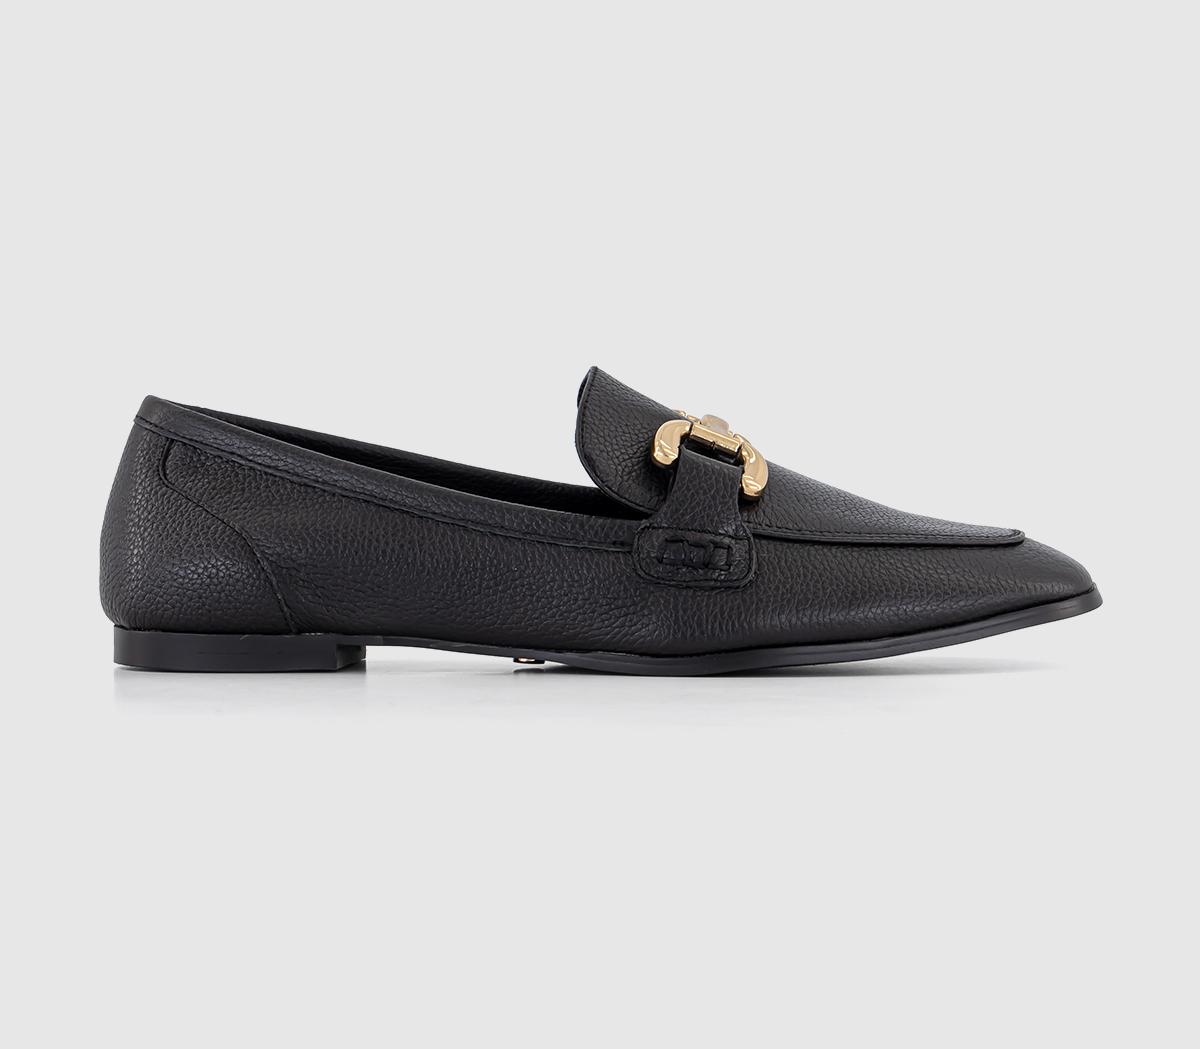 Farland Leather Trim Loafers Black Leather